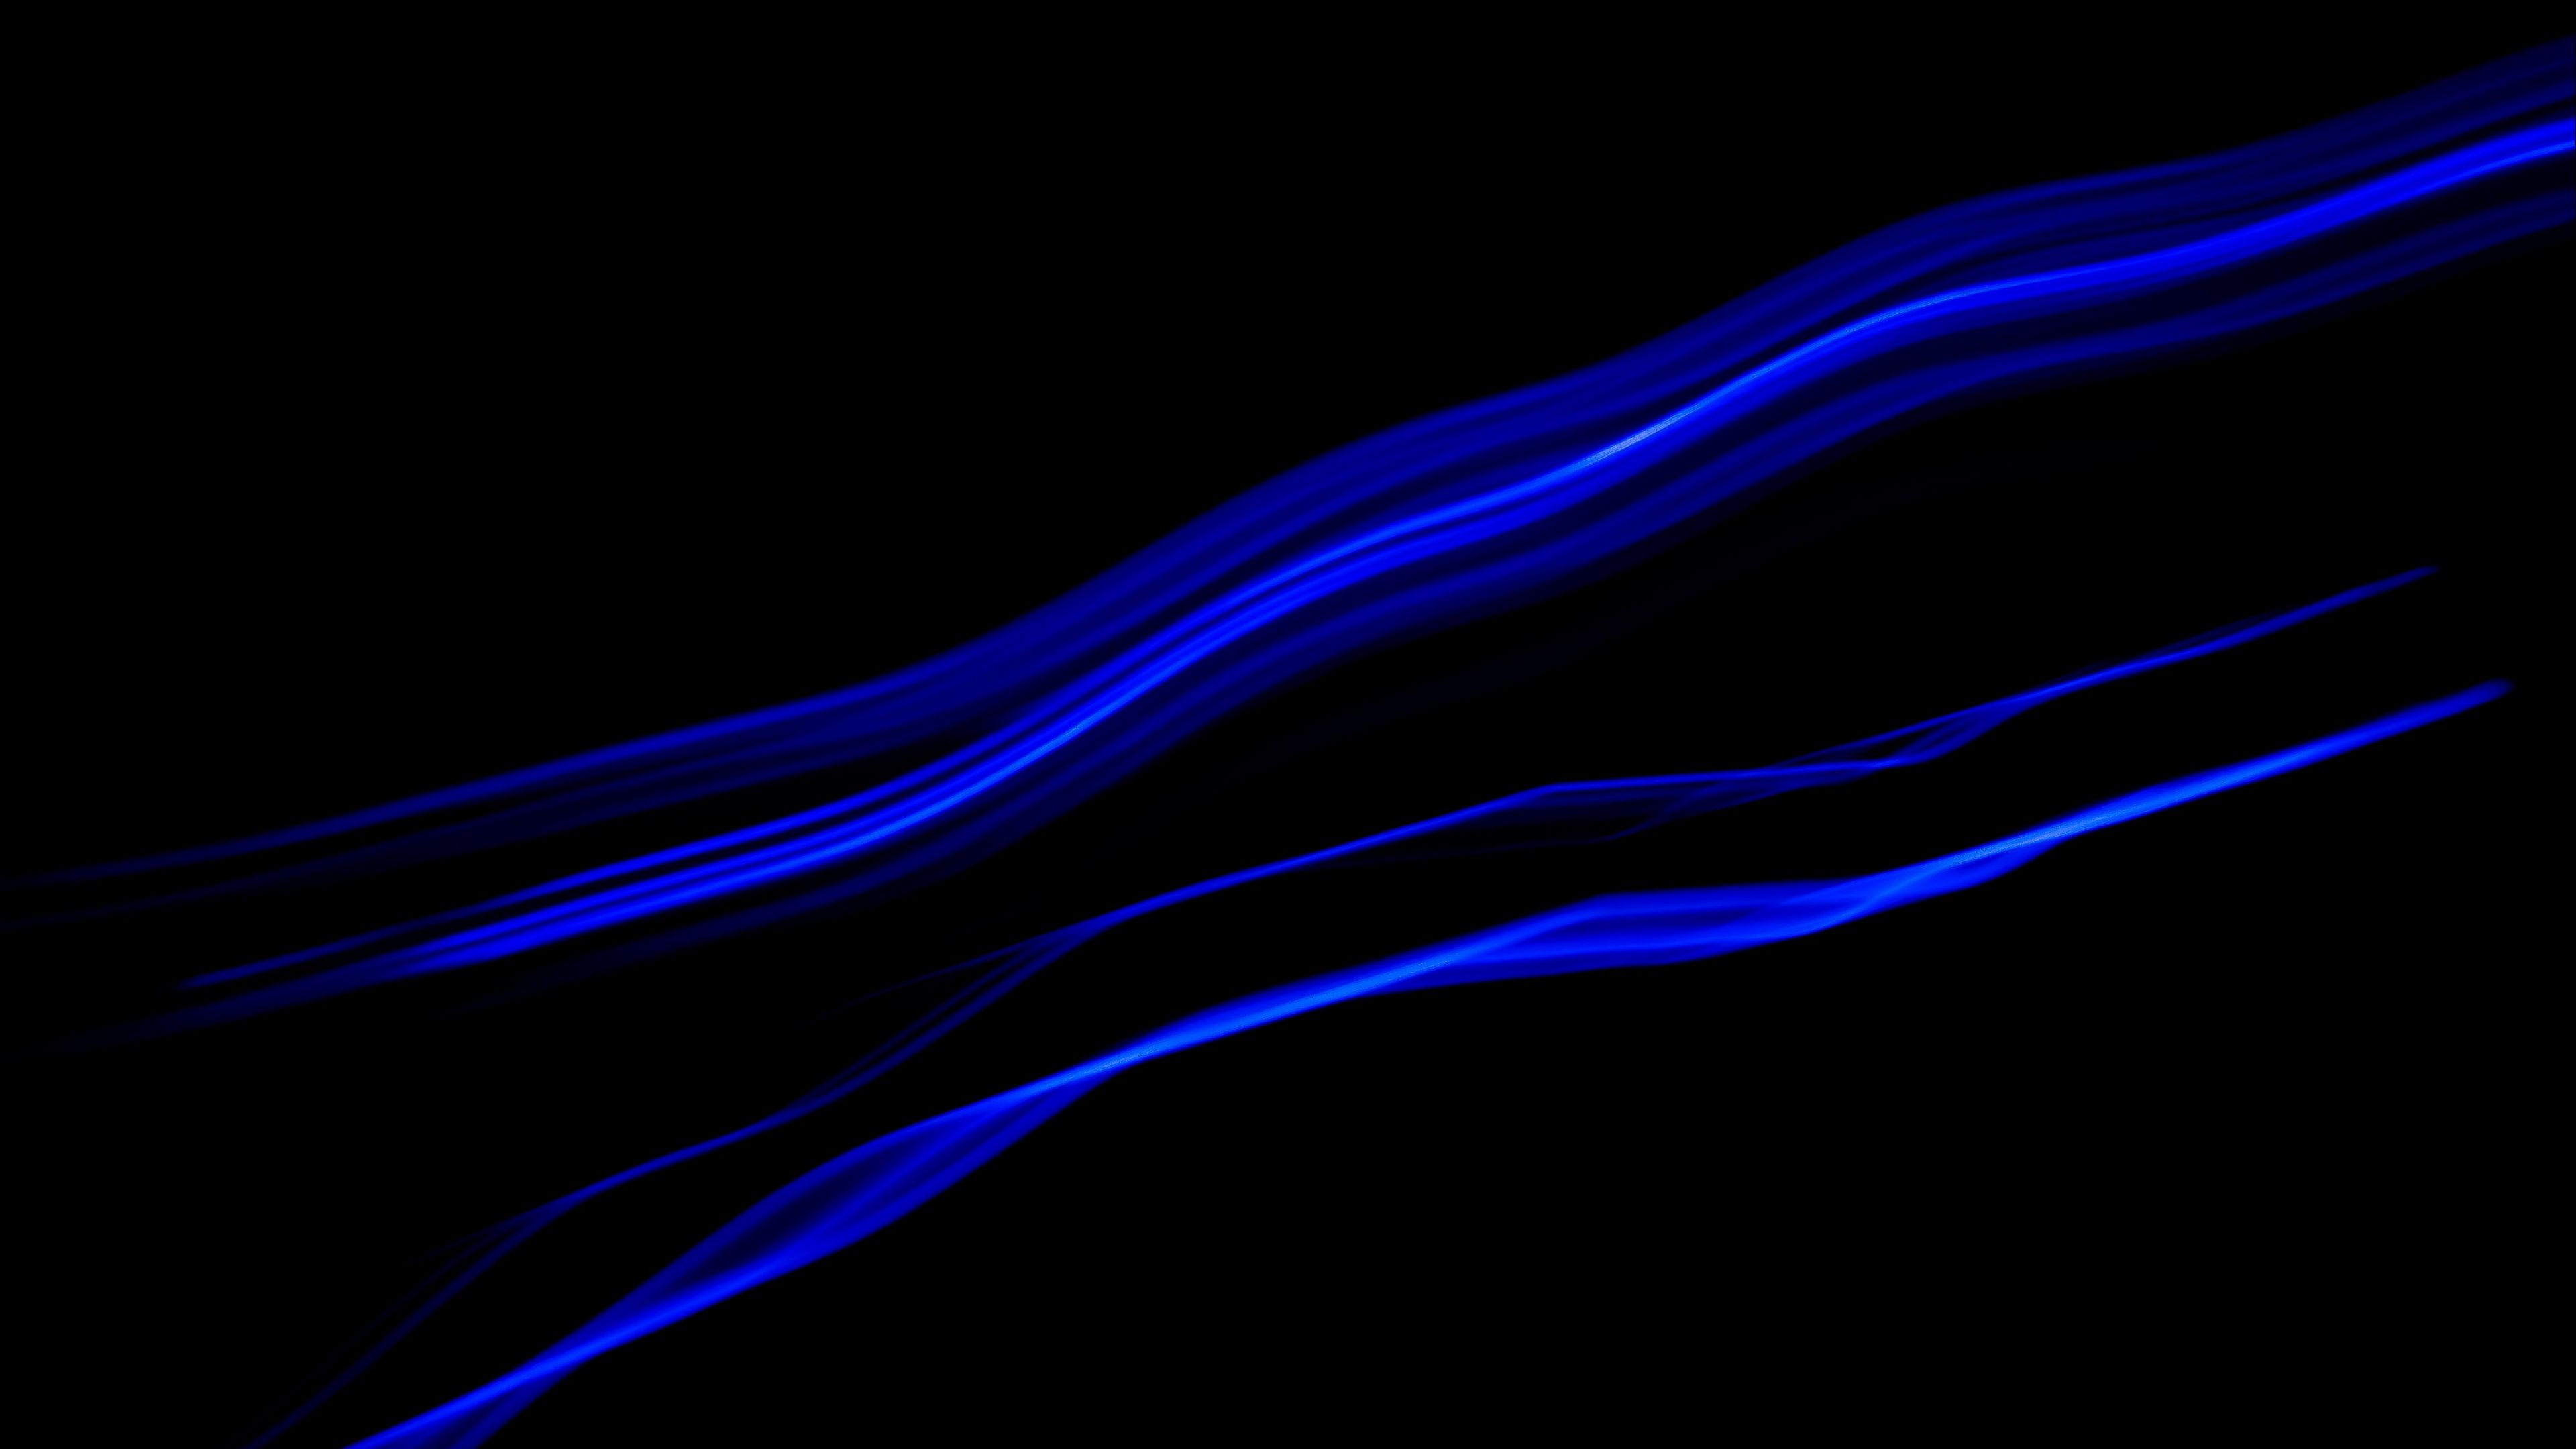 Download wallpaper 3840x2160 lines, light, blue, long exposure, abstraction 4k  uhd 16:9 hd background